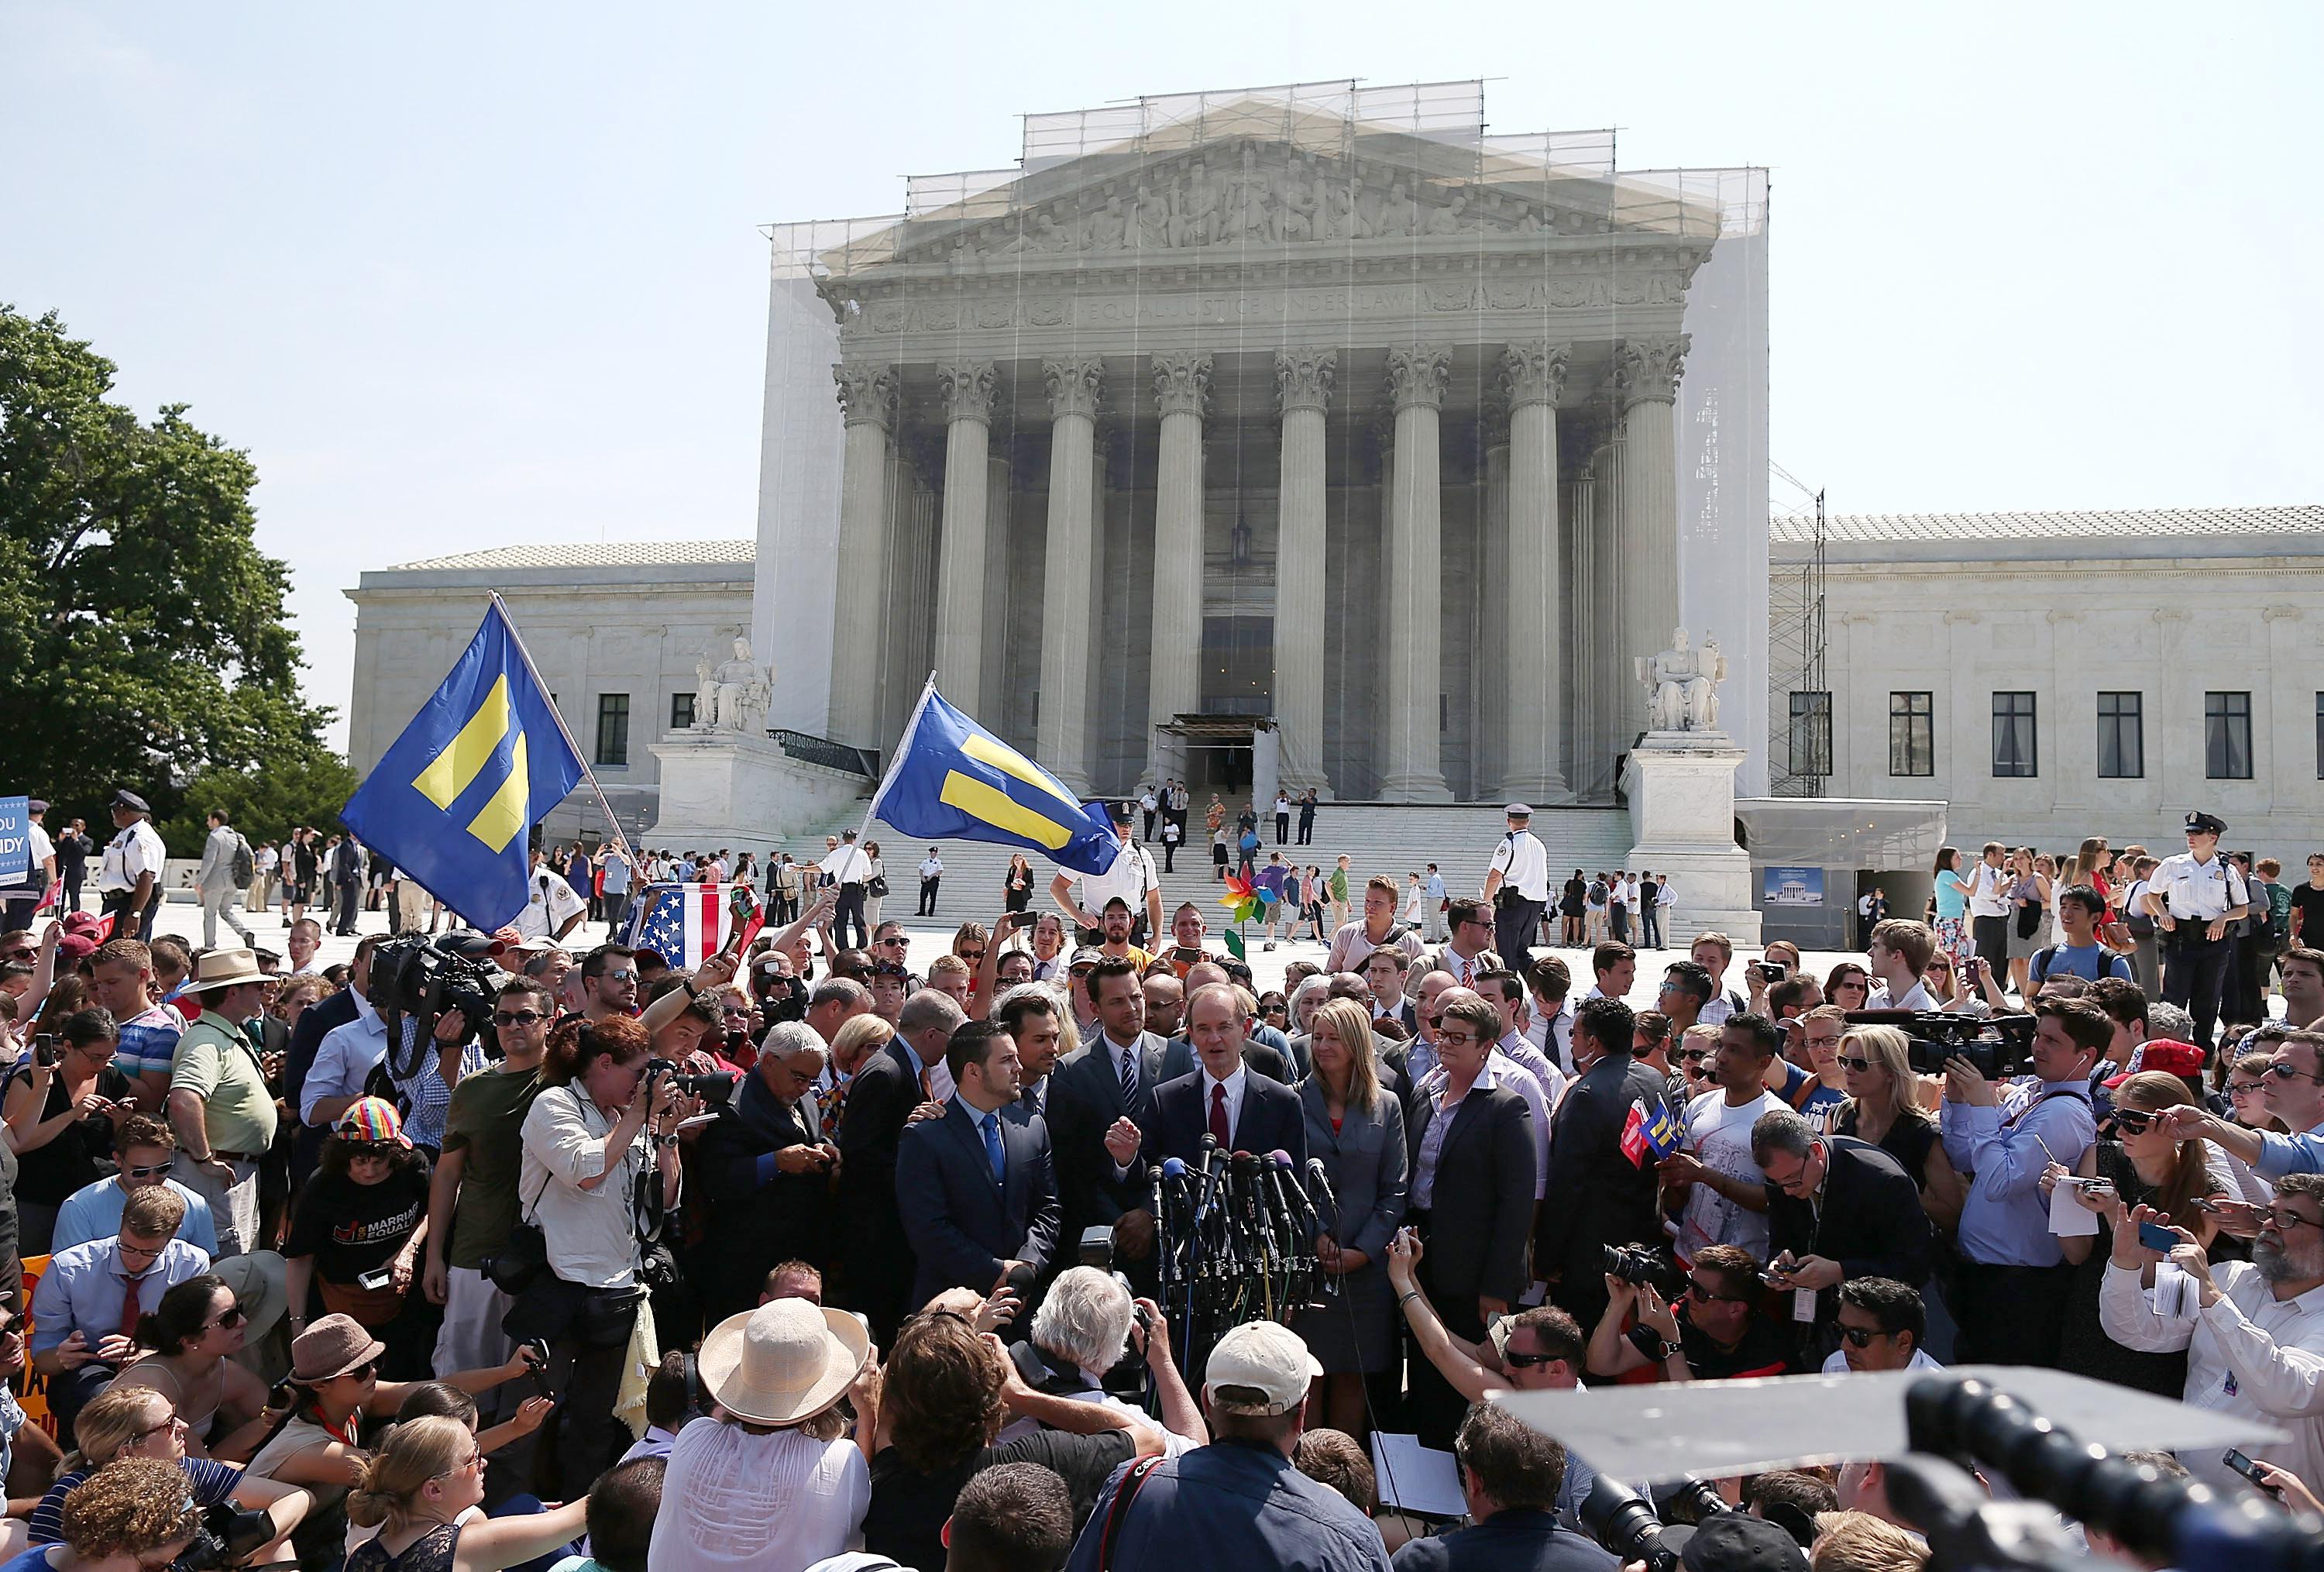 The crowd at the U.S. Supreme Court on June 26, 2013, when the high court struck down the Defense of Marriage Act.